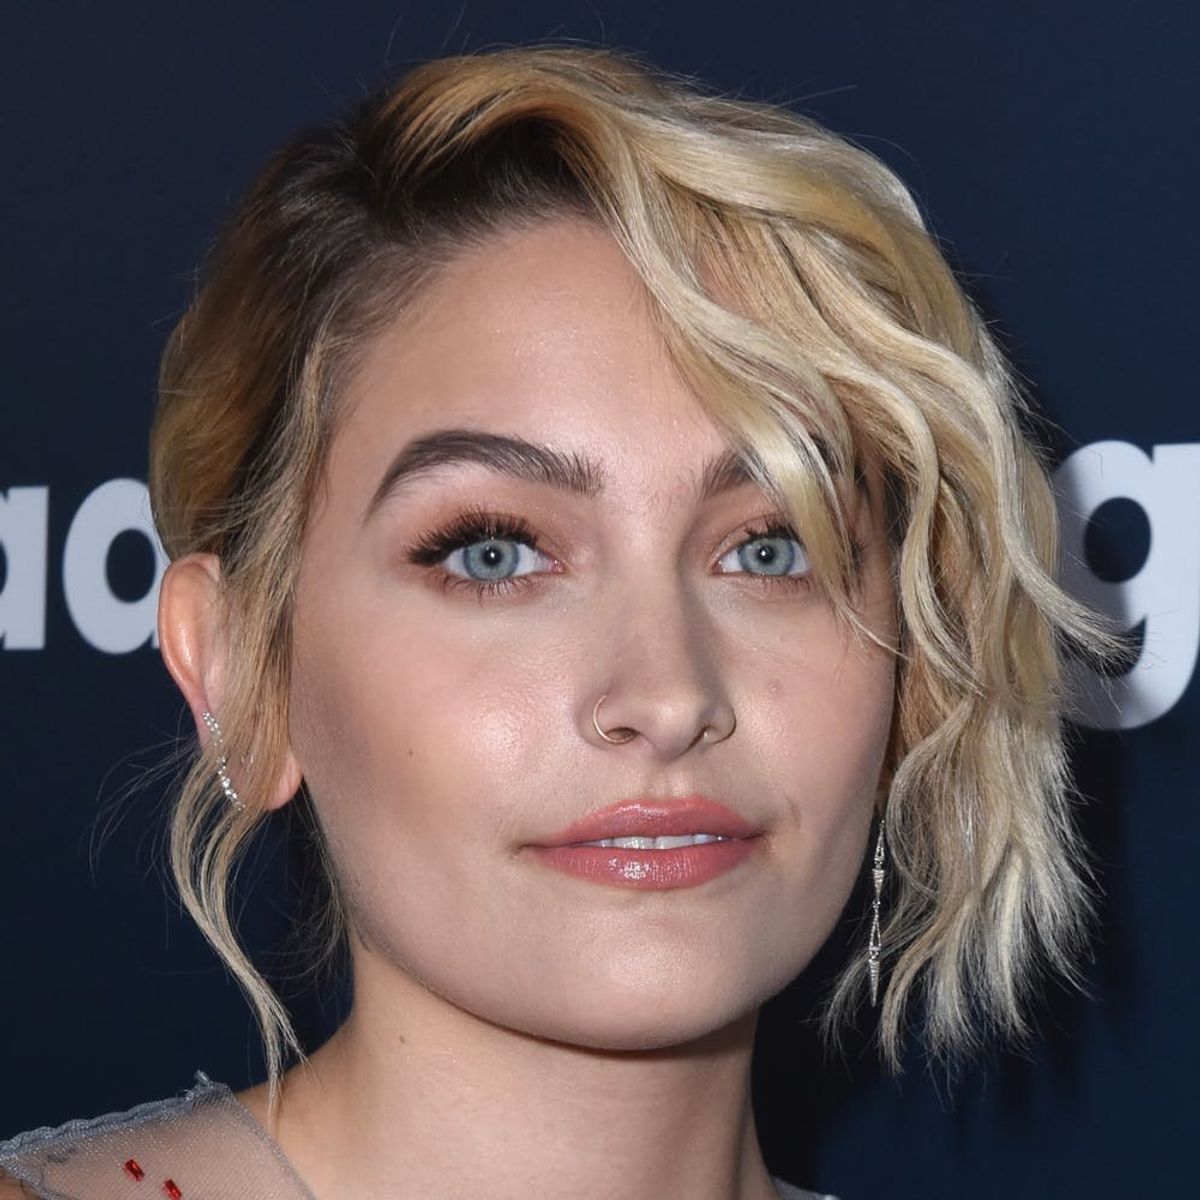 Paris Jackson Just Schooled Us All on How to Wear a Cape in a Colorful Peacock Dress